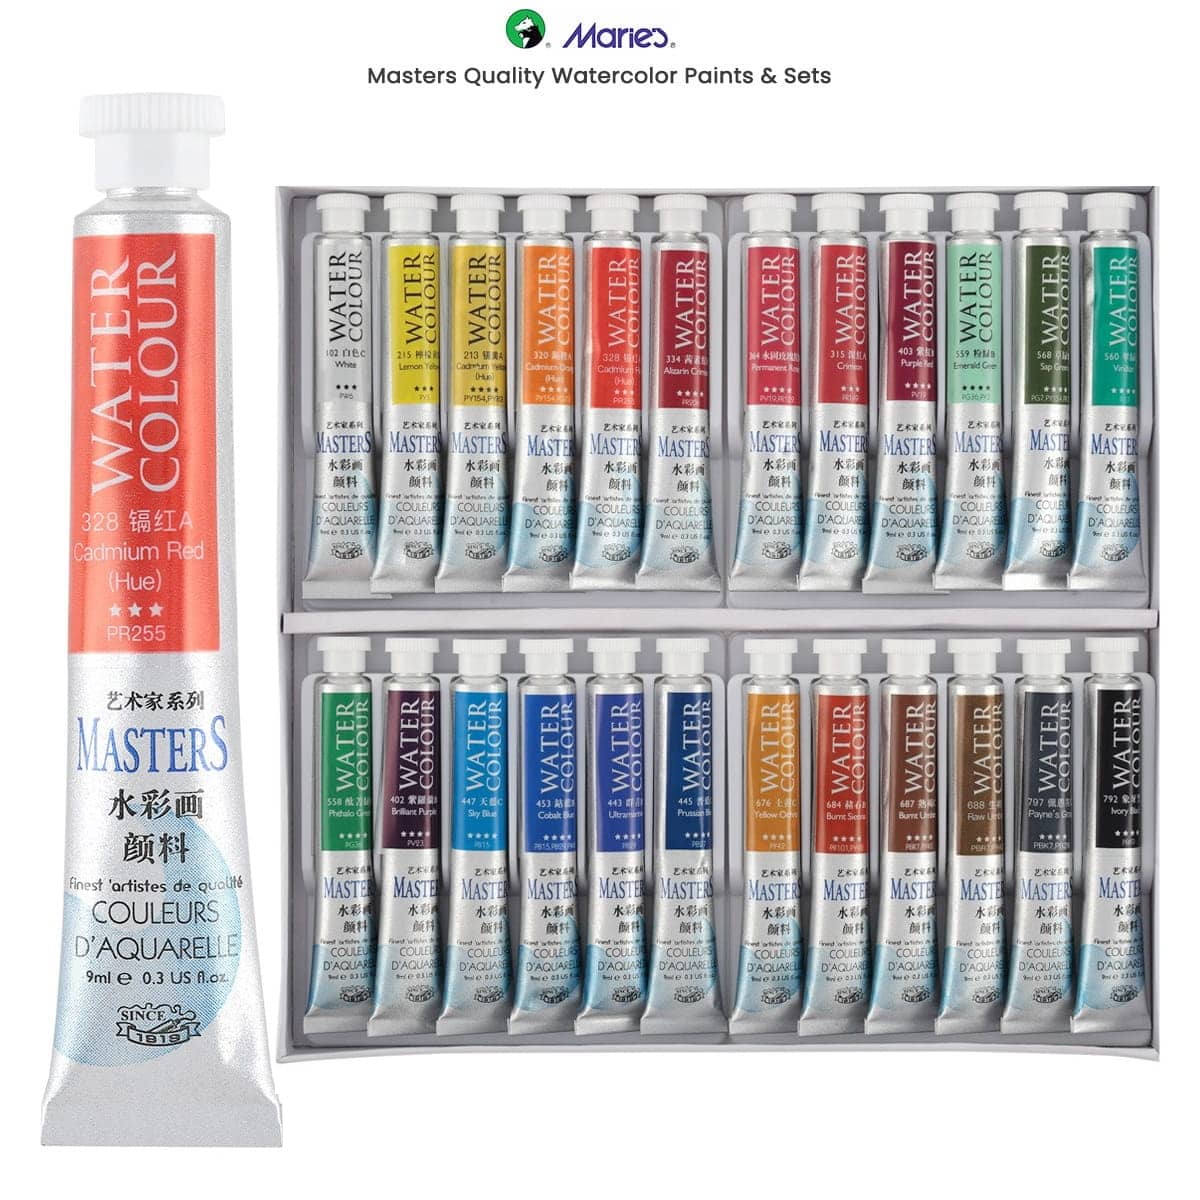 Maries Master Quality Watercolor Paints Sets